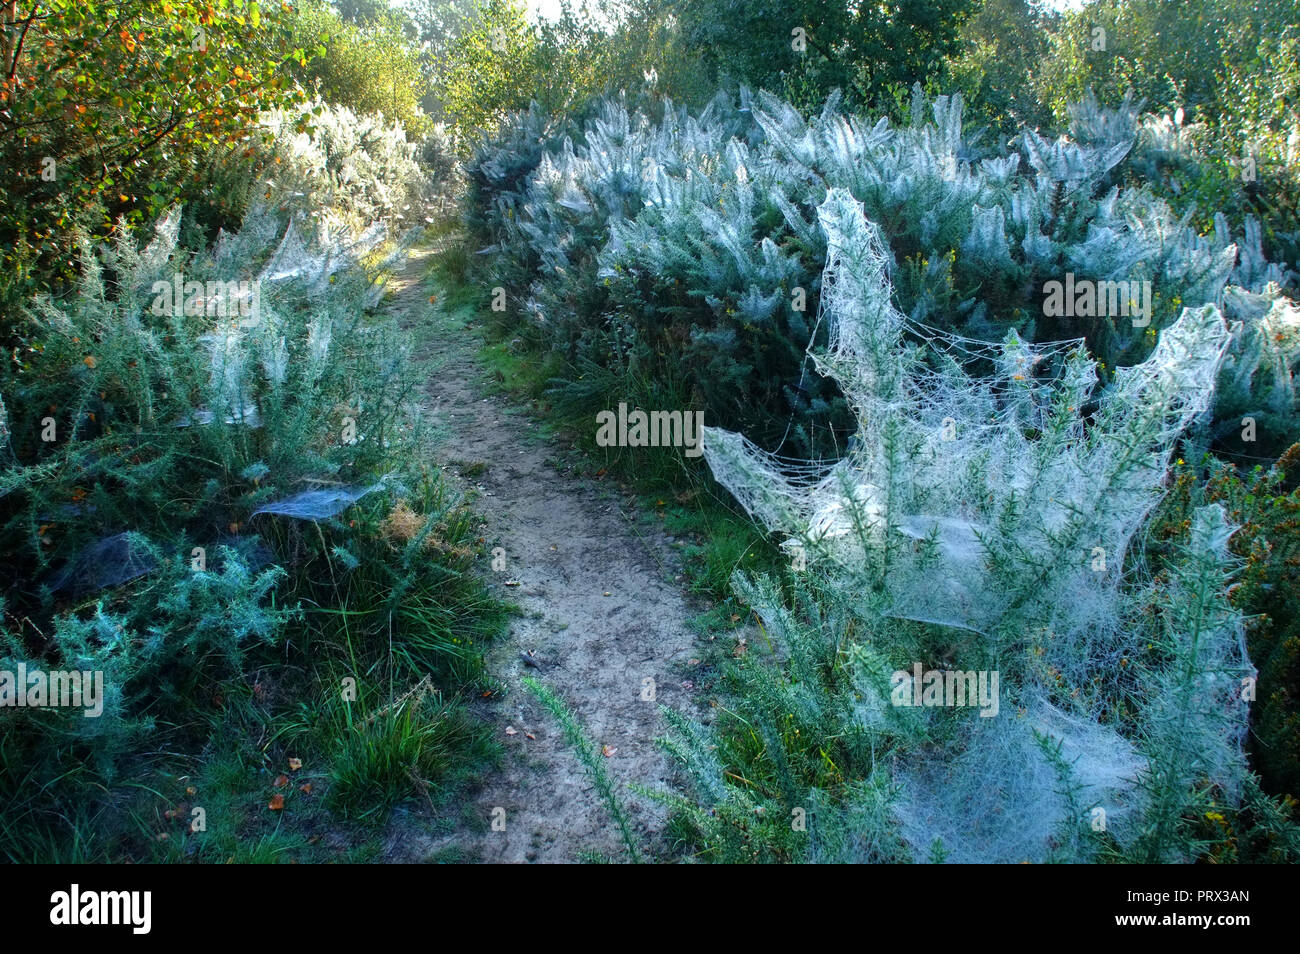 Chailey Common nature reserve, East Sussex. UK. 5th October 2018.Blankets of cobwebs cover gorse bushes in Chailey Common, UK. The webs are created by vast colonies of tiny gorse spider mites . ©Peter Cripps/Alamy Live News Stock Photo